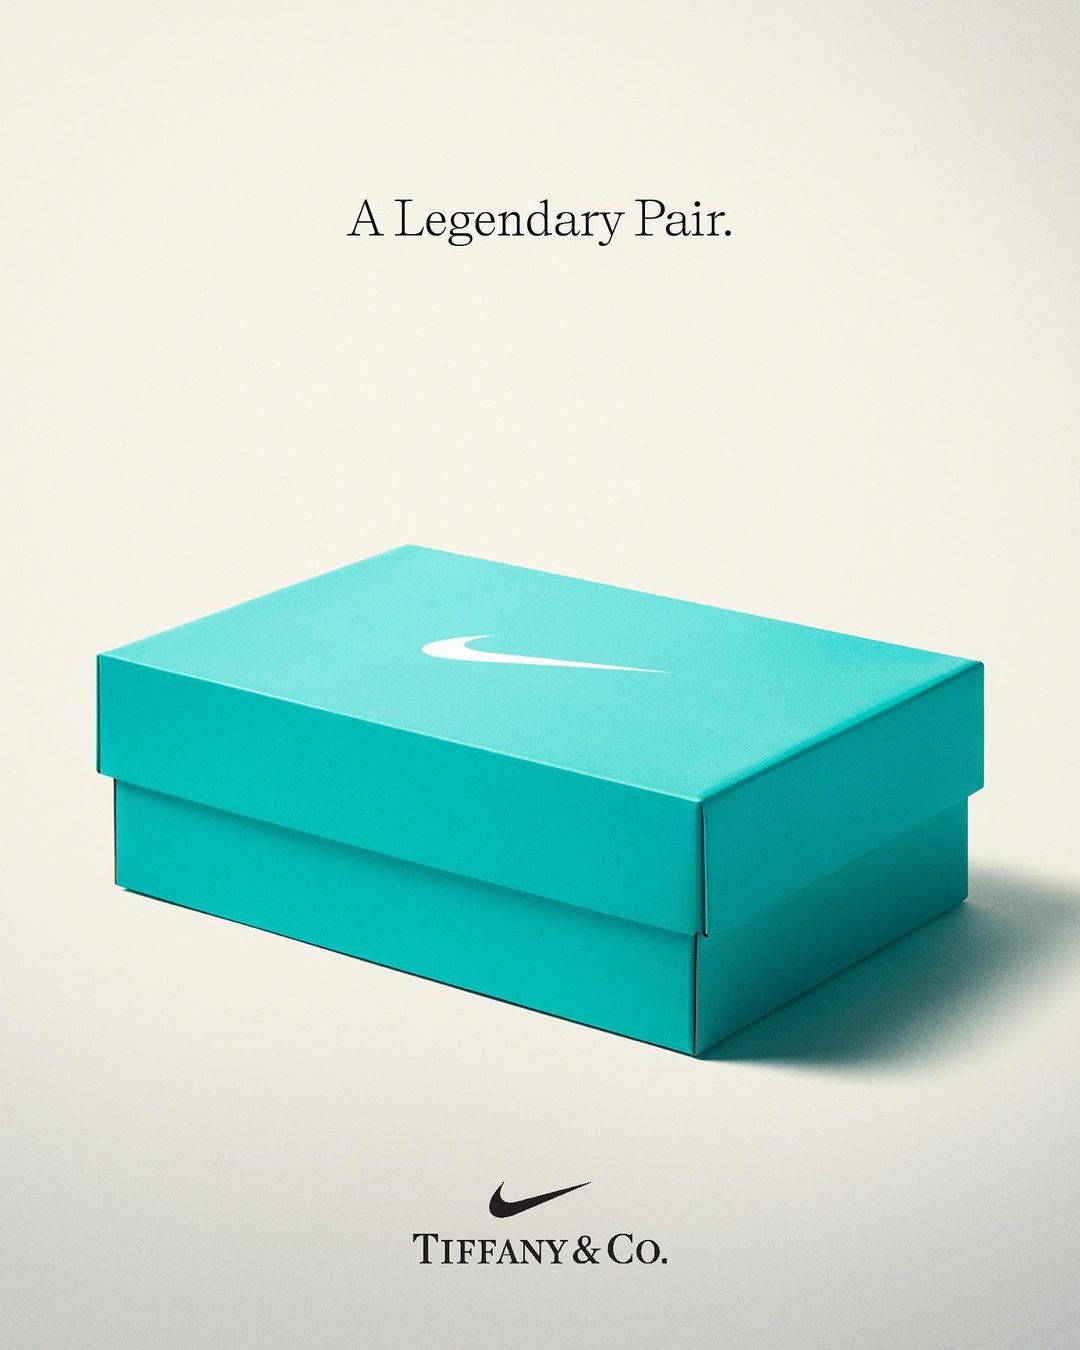 Tiffany x Nike Is The Sneaker Collab We Didn’t Know We Needed